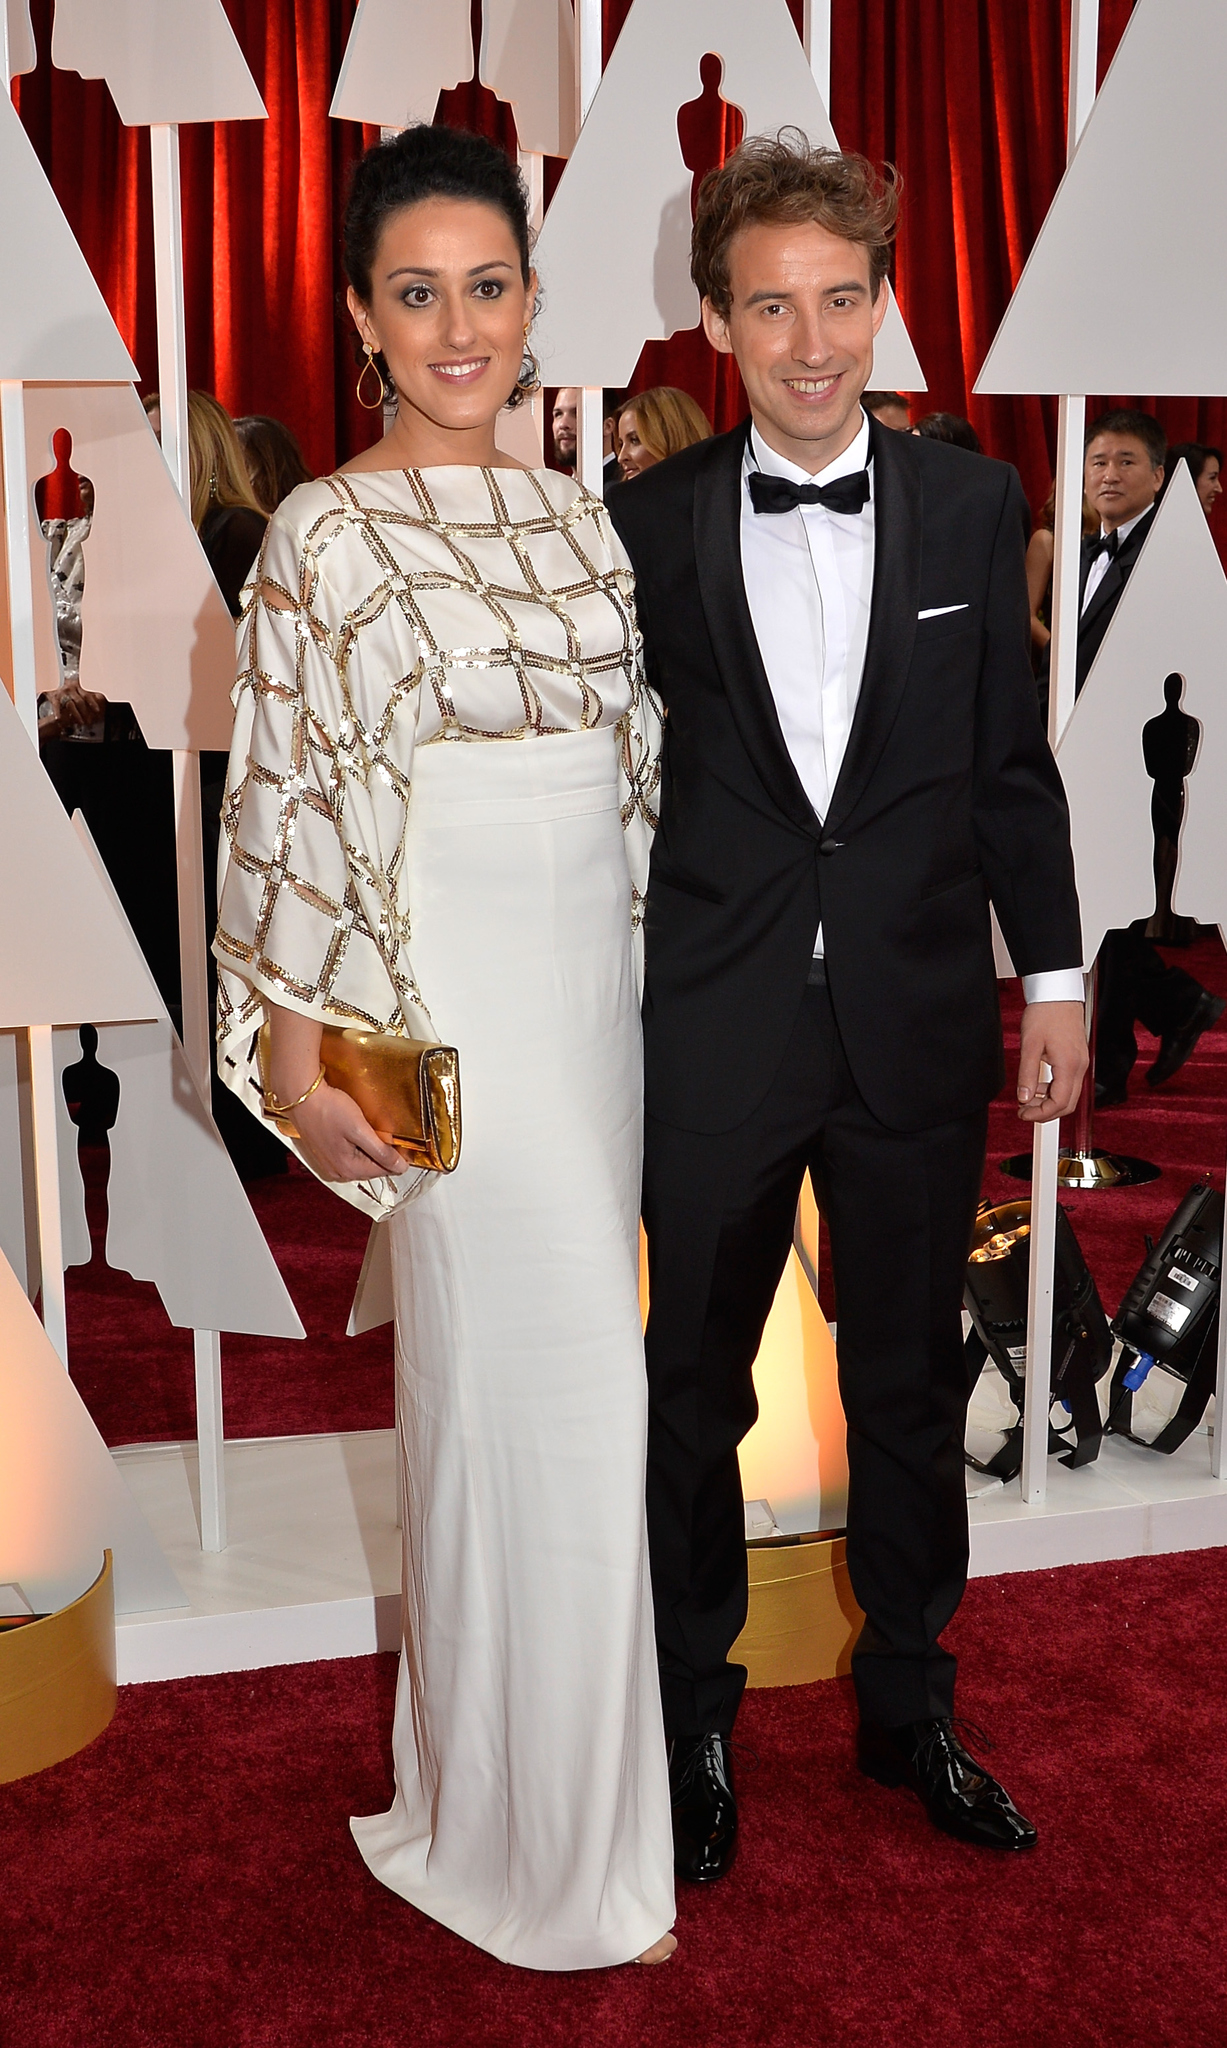 Stefan Eichenberger and Talkhon Hamzavi at event of The Oscars (2015)